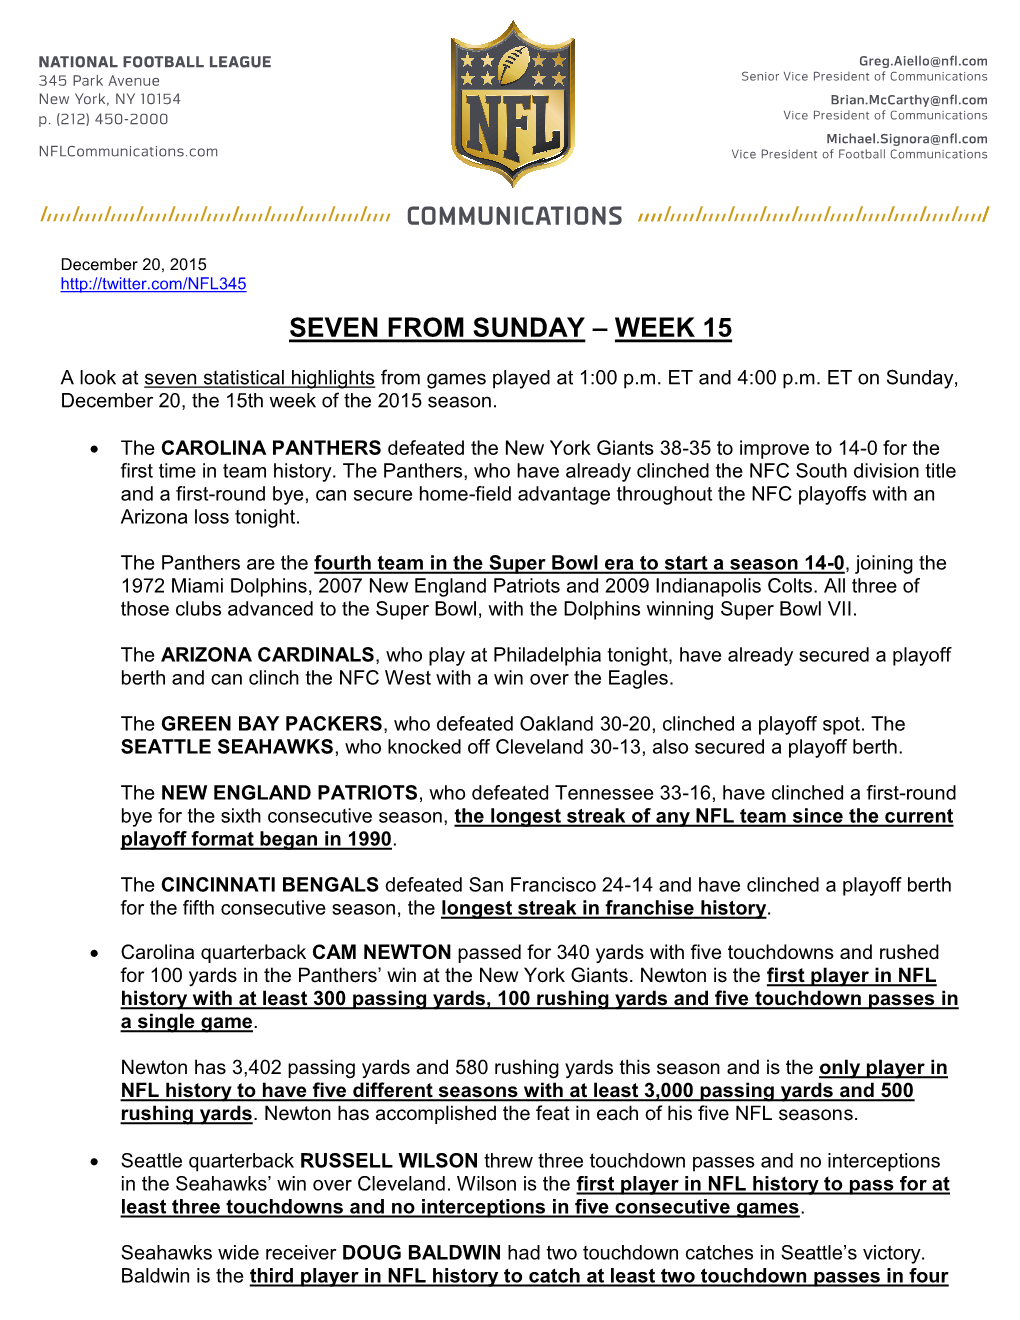 Seven from Sunday – Week 15